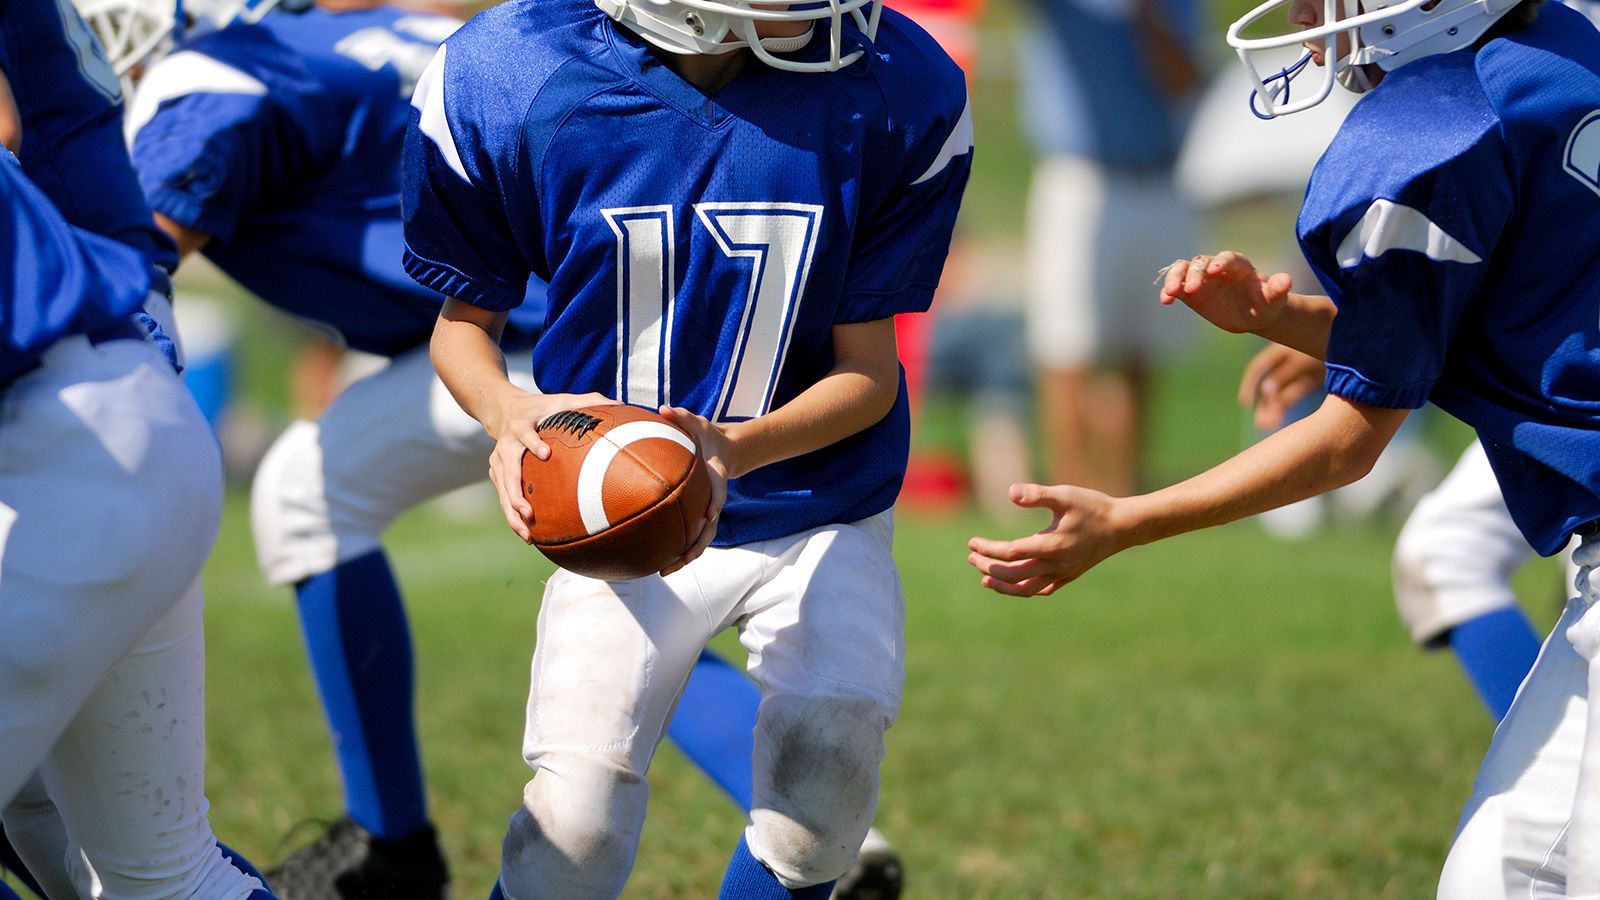 Concussions in Youth Sports: A Doctor Explains